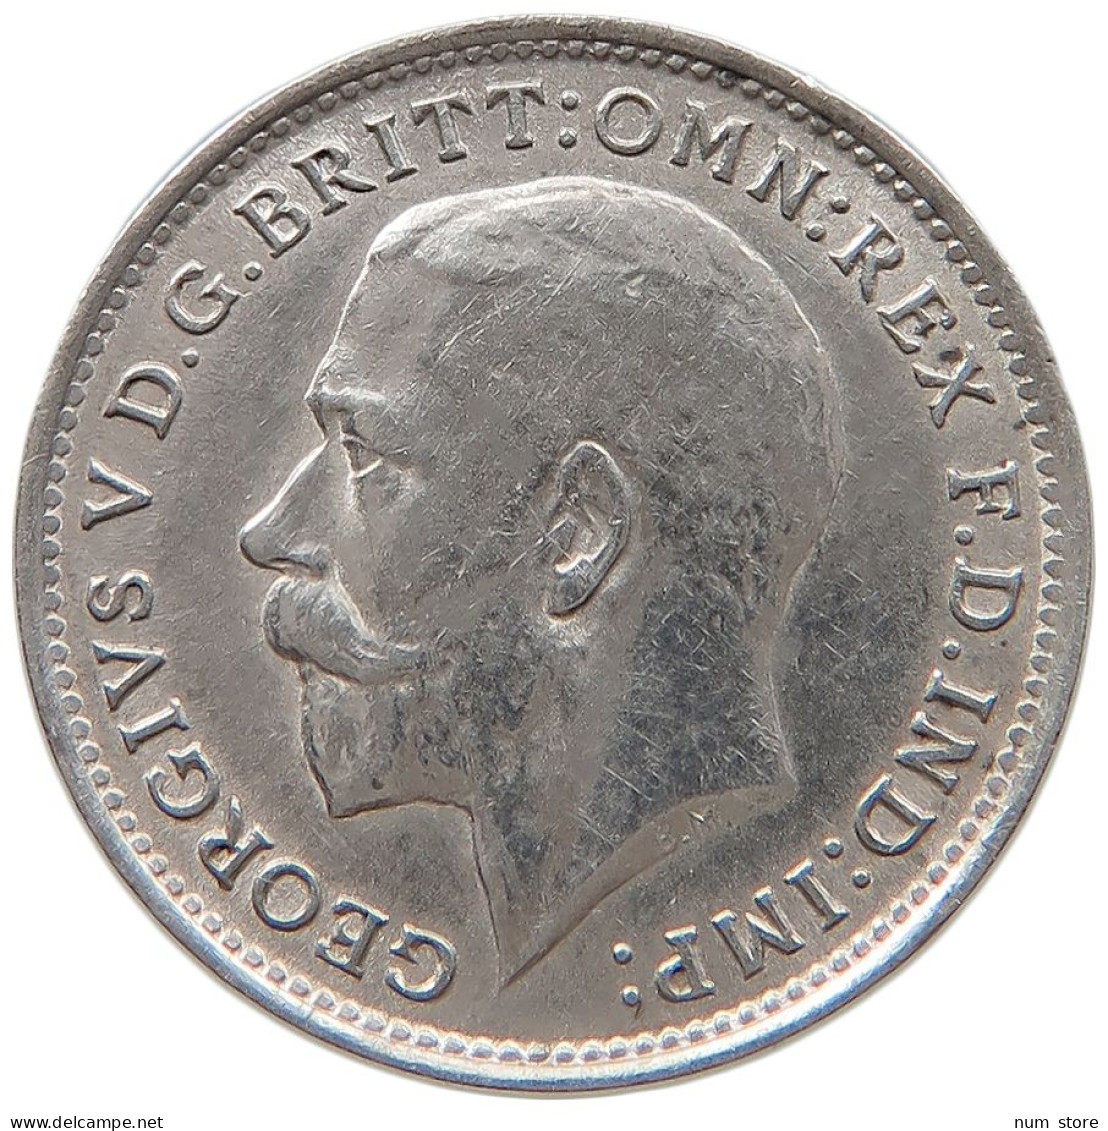 GREAT BRITAIN THREEPENCE 1918 George V. (1910-1936) #t143 0631 - F. 3 Pence